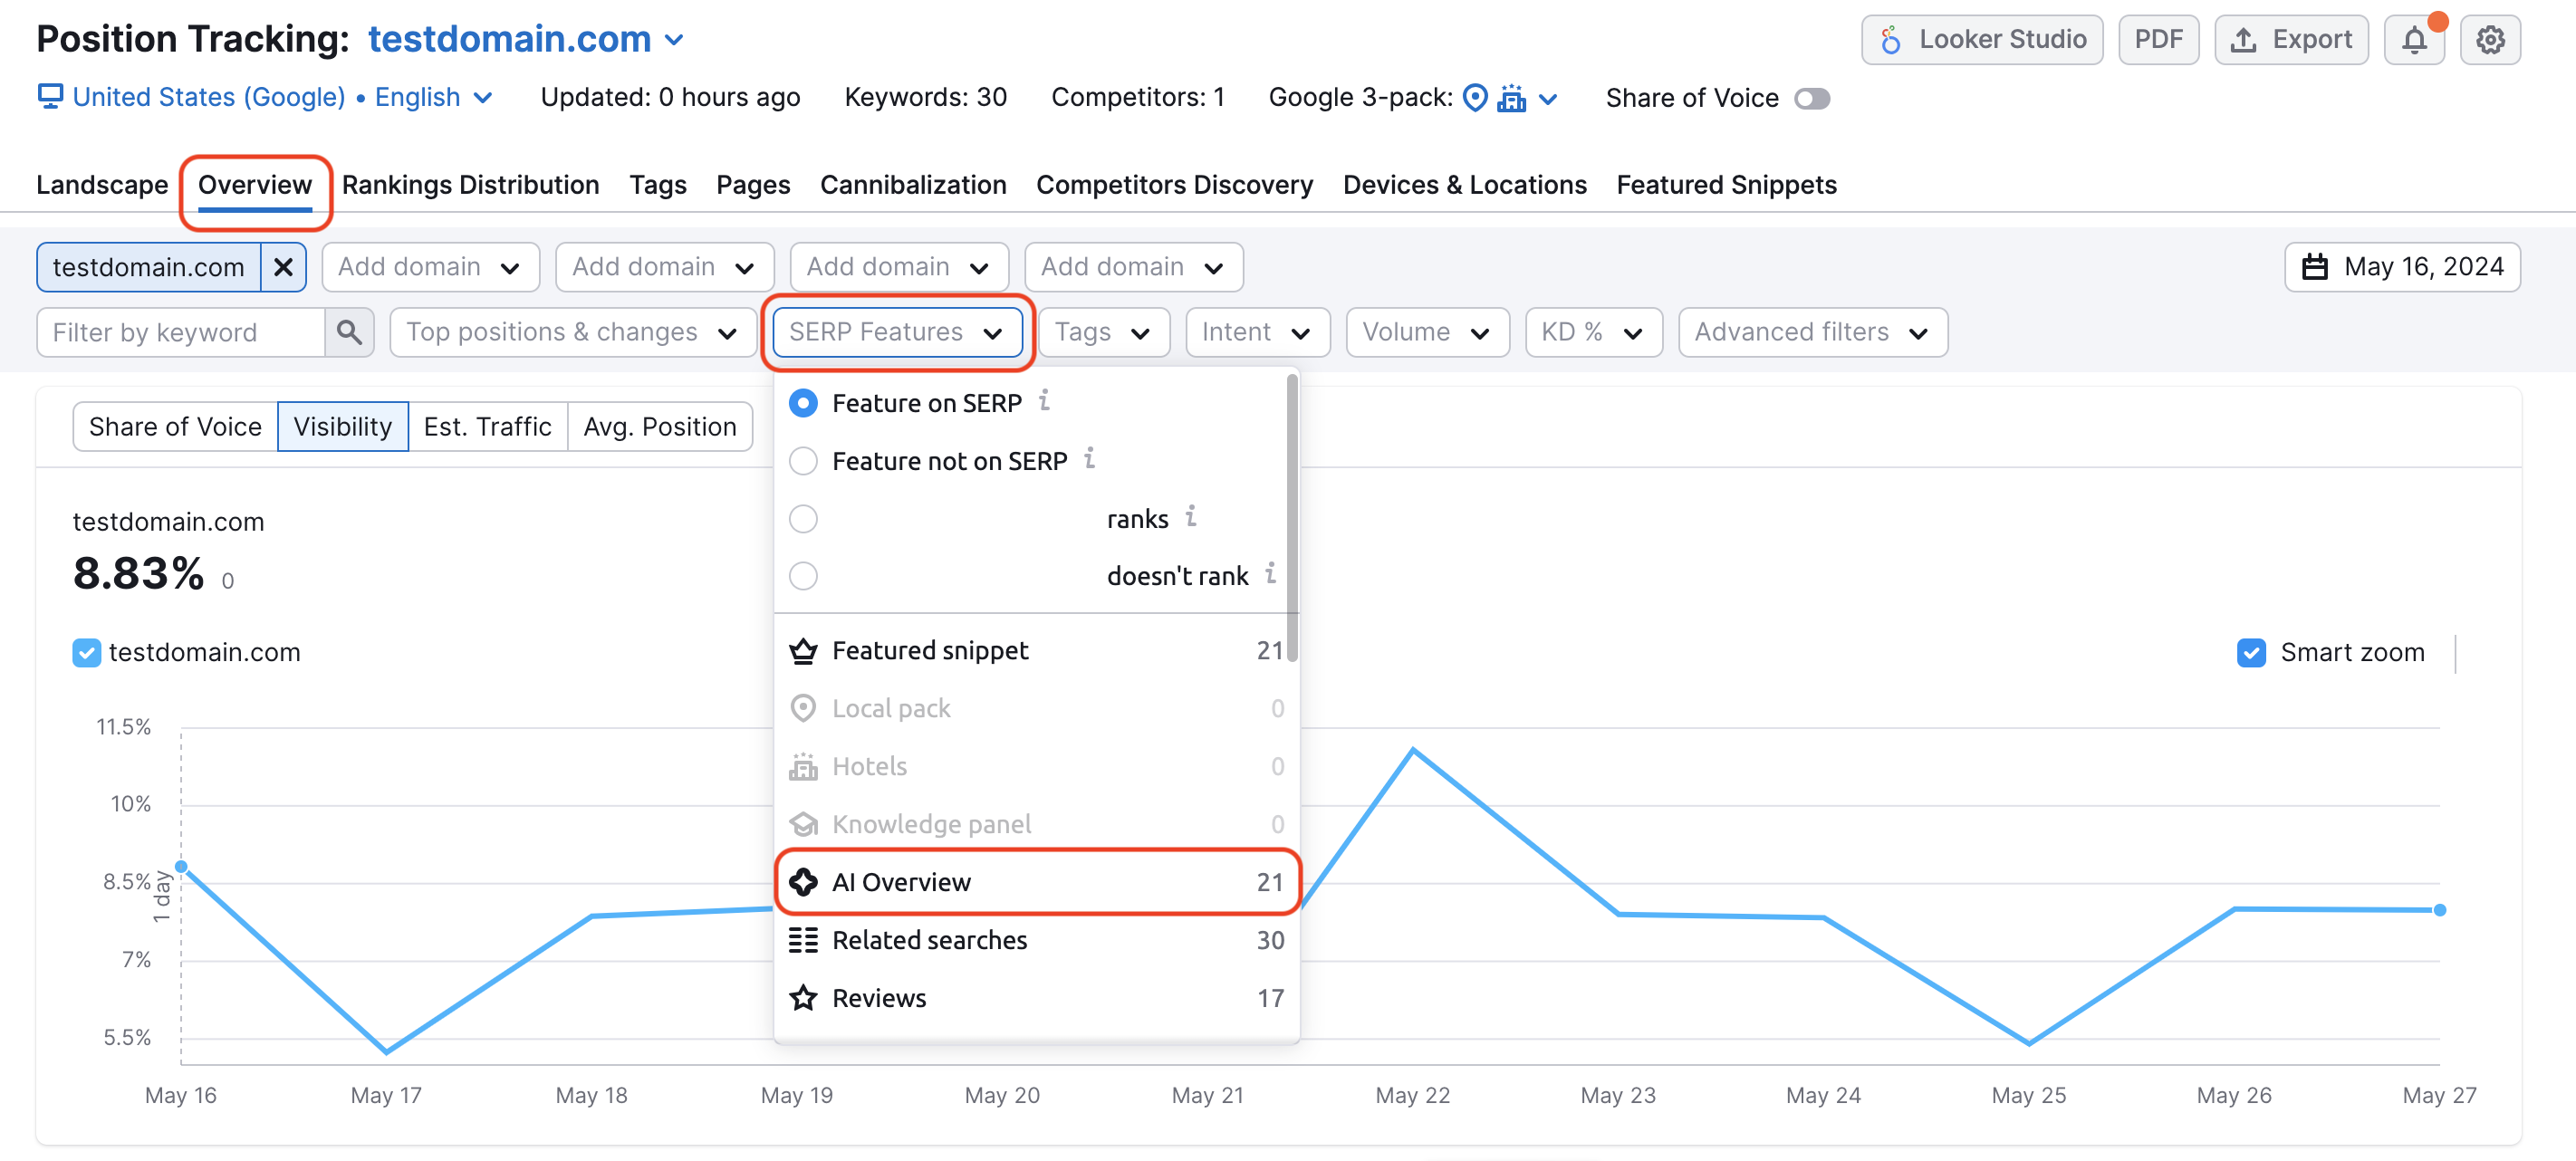 Overview report in Position Tracking. The name of the tab is highlighted. In the report, a SERP Features filter is opened and AI Overview is highlighted among all other options.